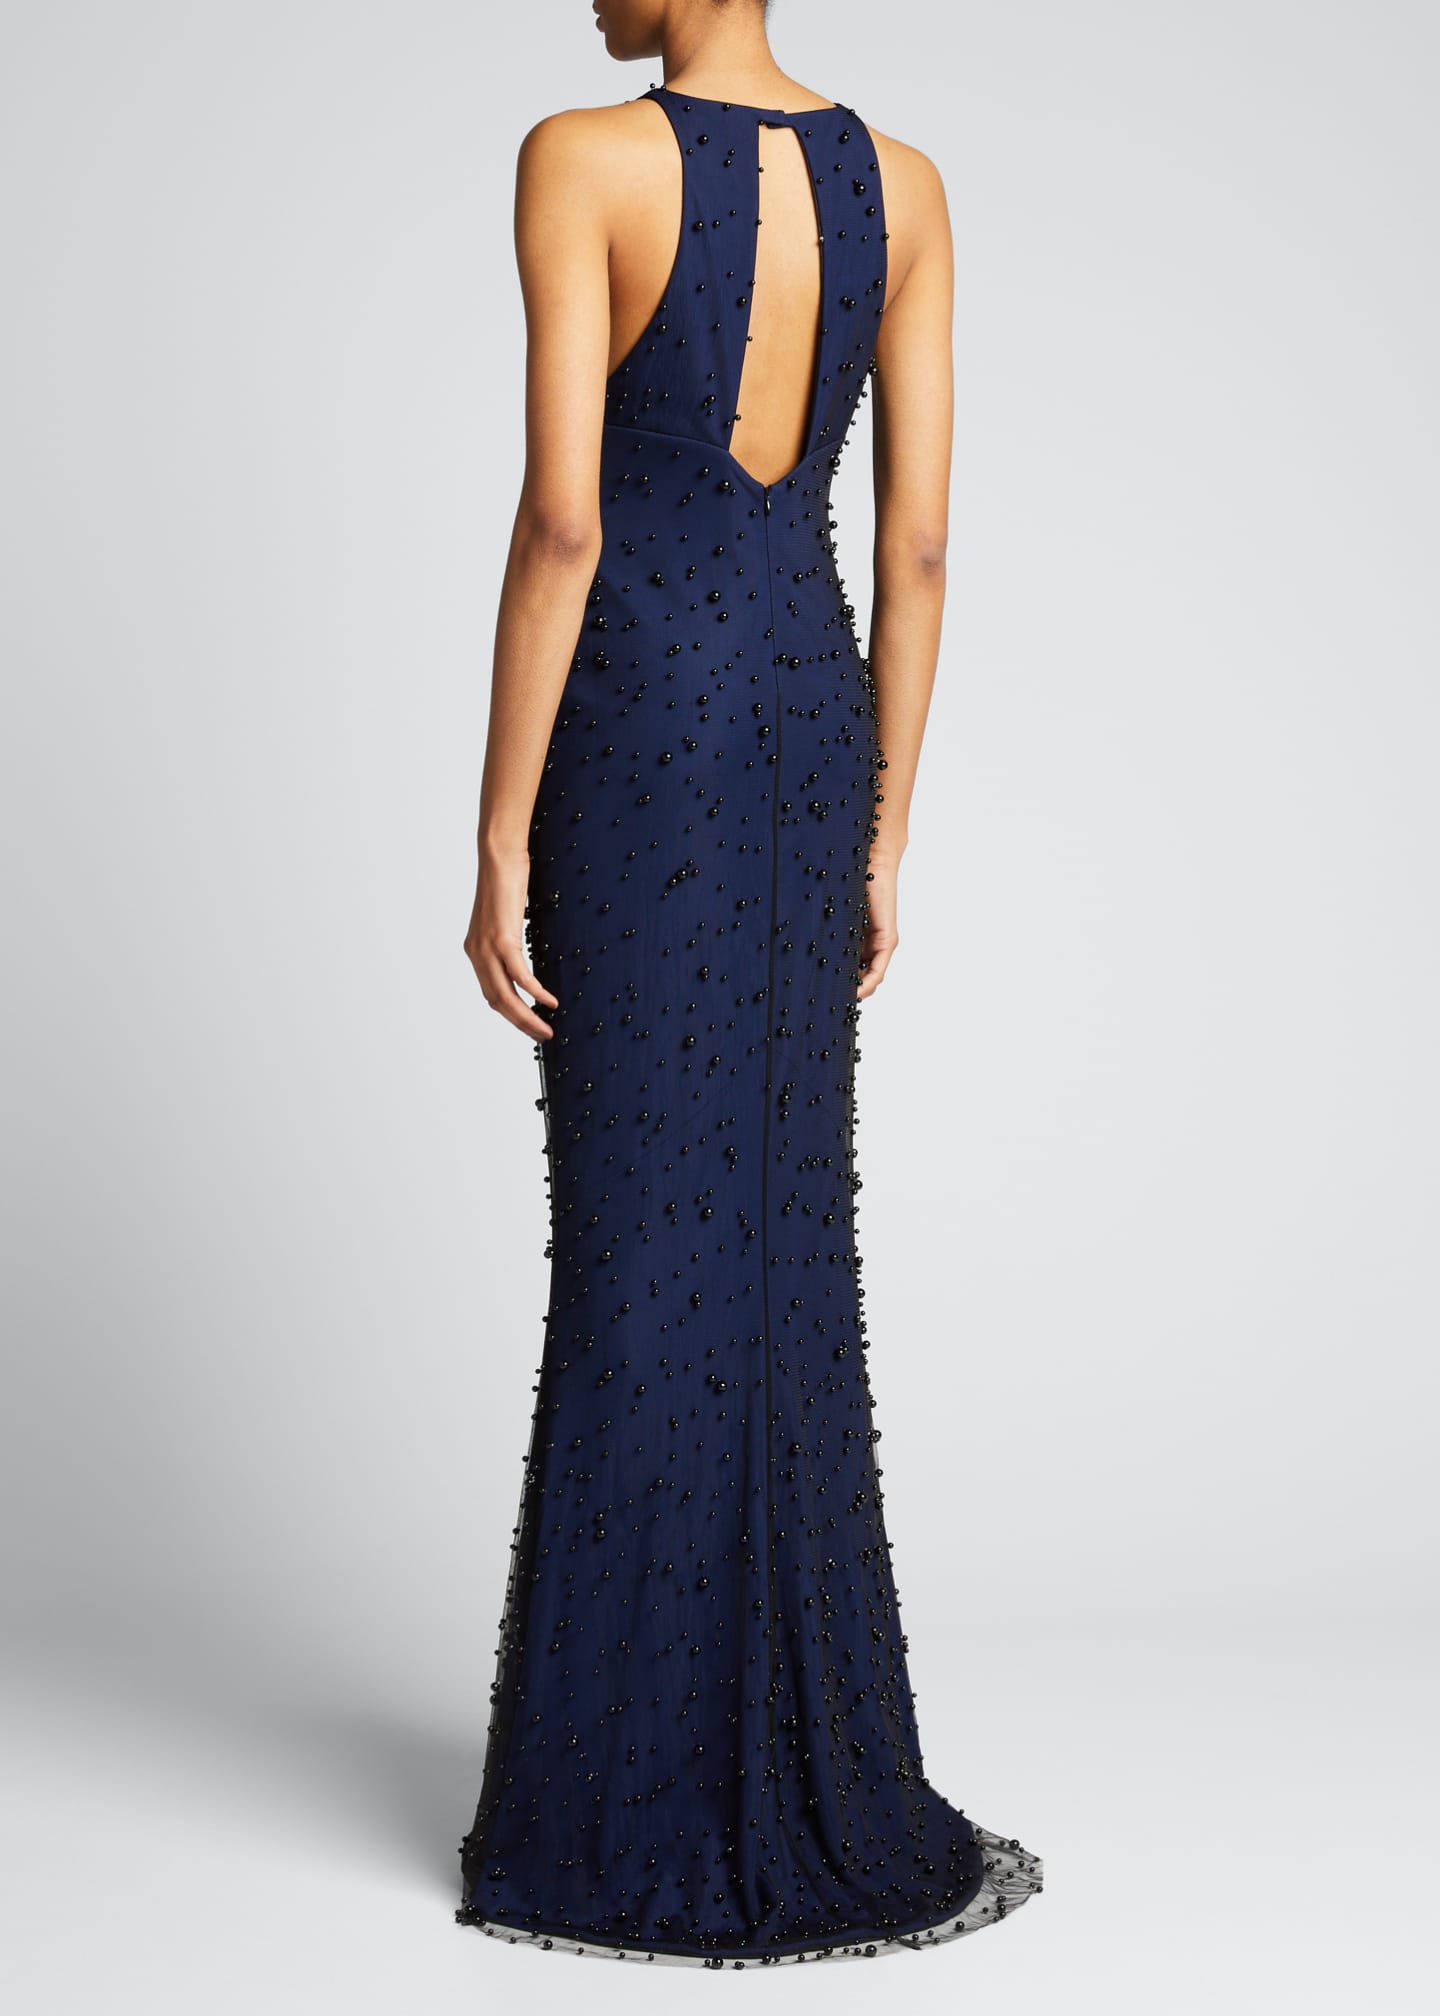 CDGNY Tulle Open-Back Gown w/ Pearl Overlay - Bergdorf Goodman